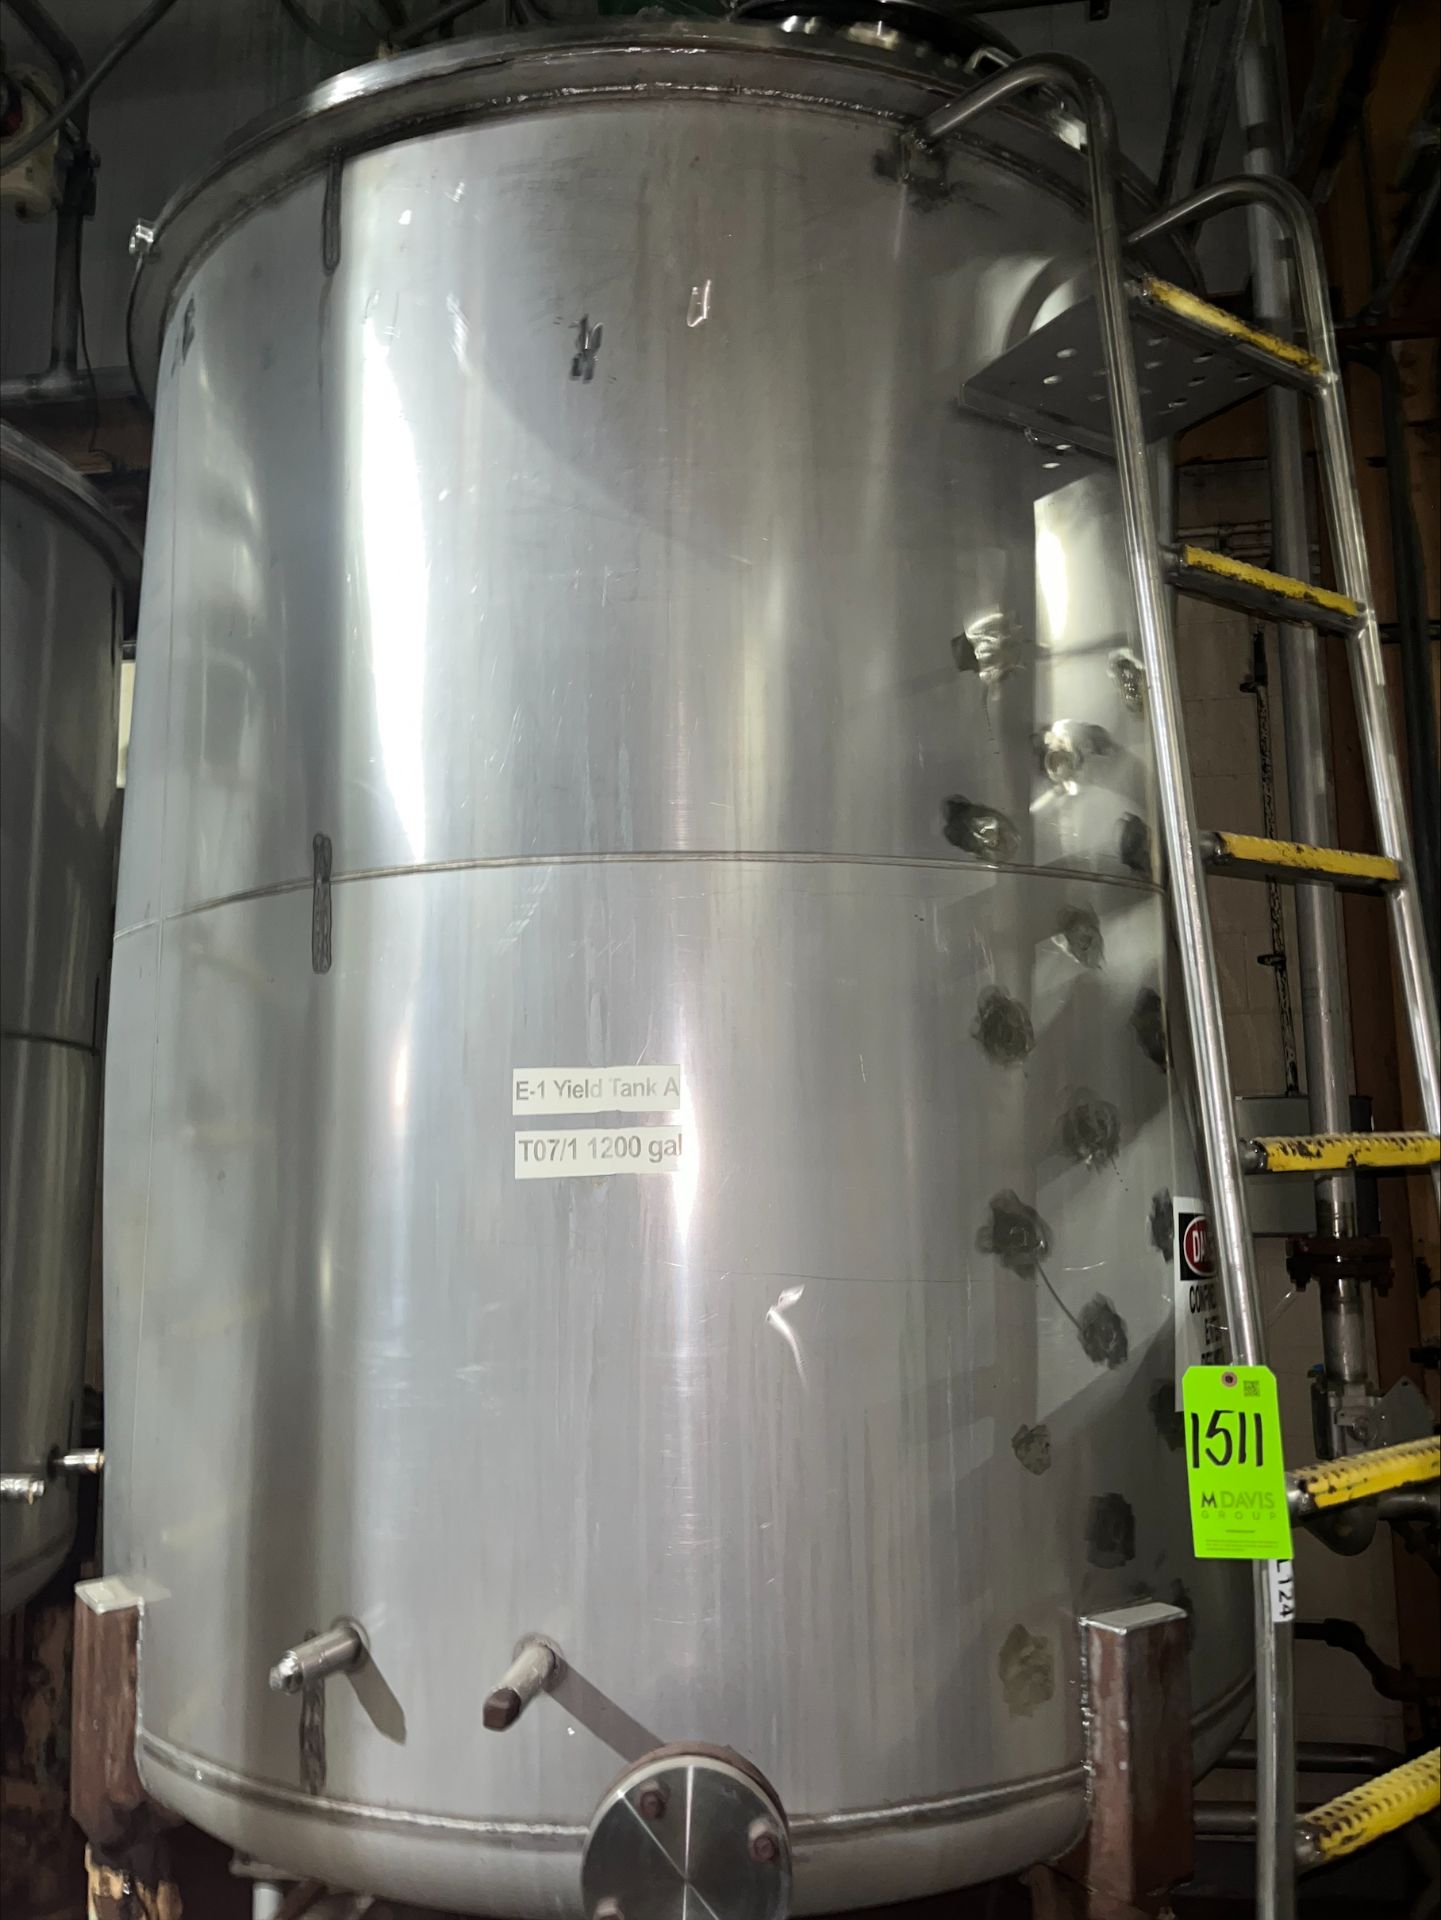 (DAMAGED) S/S 1200 GALLON E-1 YIELD TANK A (Located Freehold, NJ) (Simple Loading Fee $3,850) - Image 2 of 3